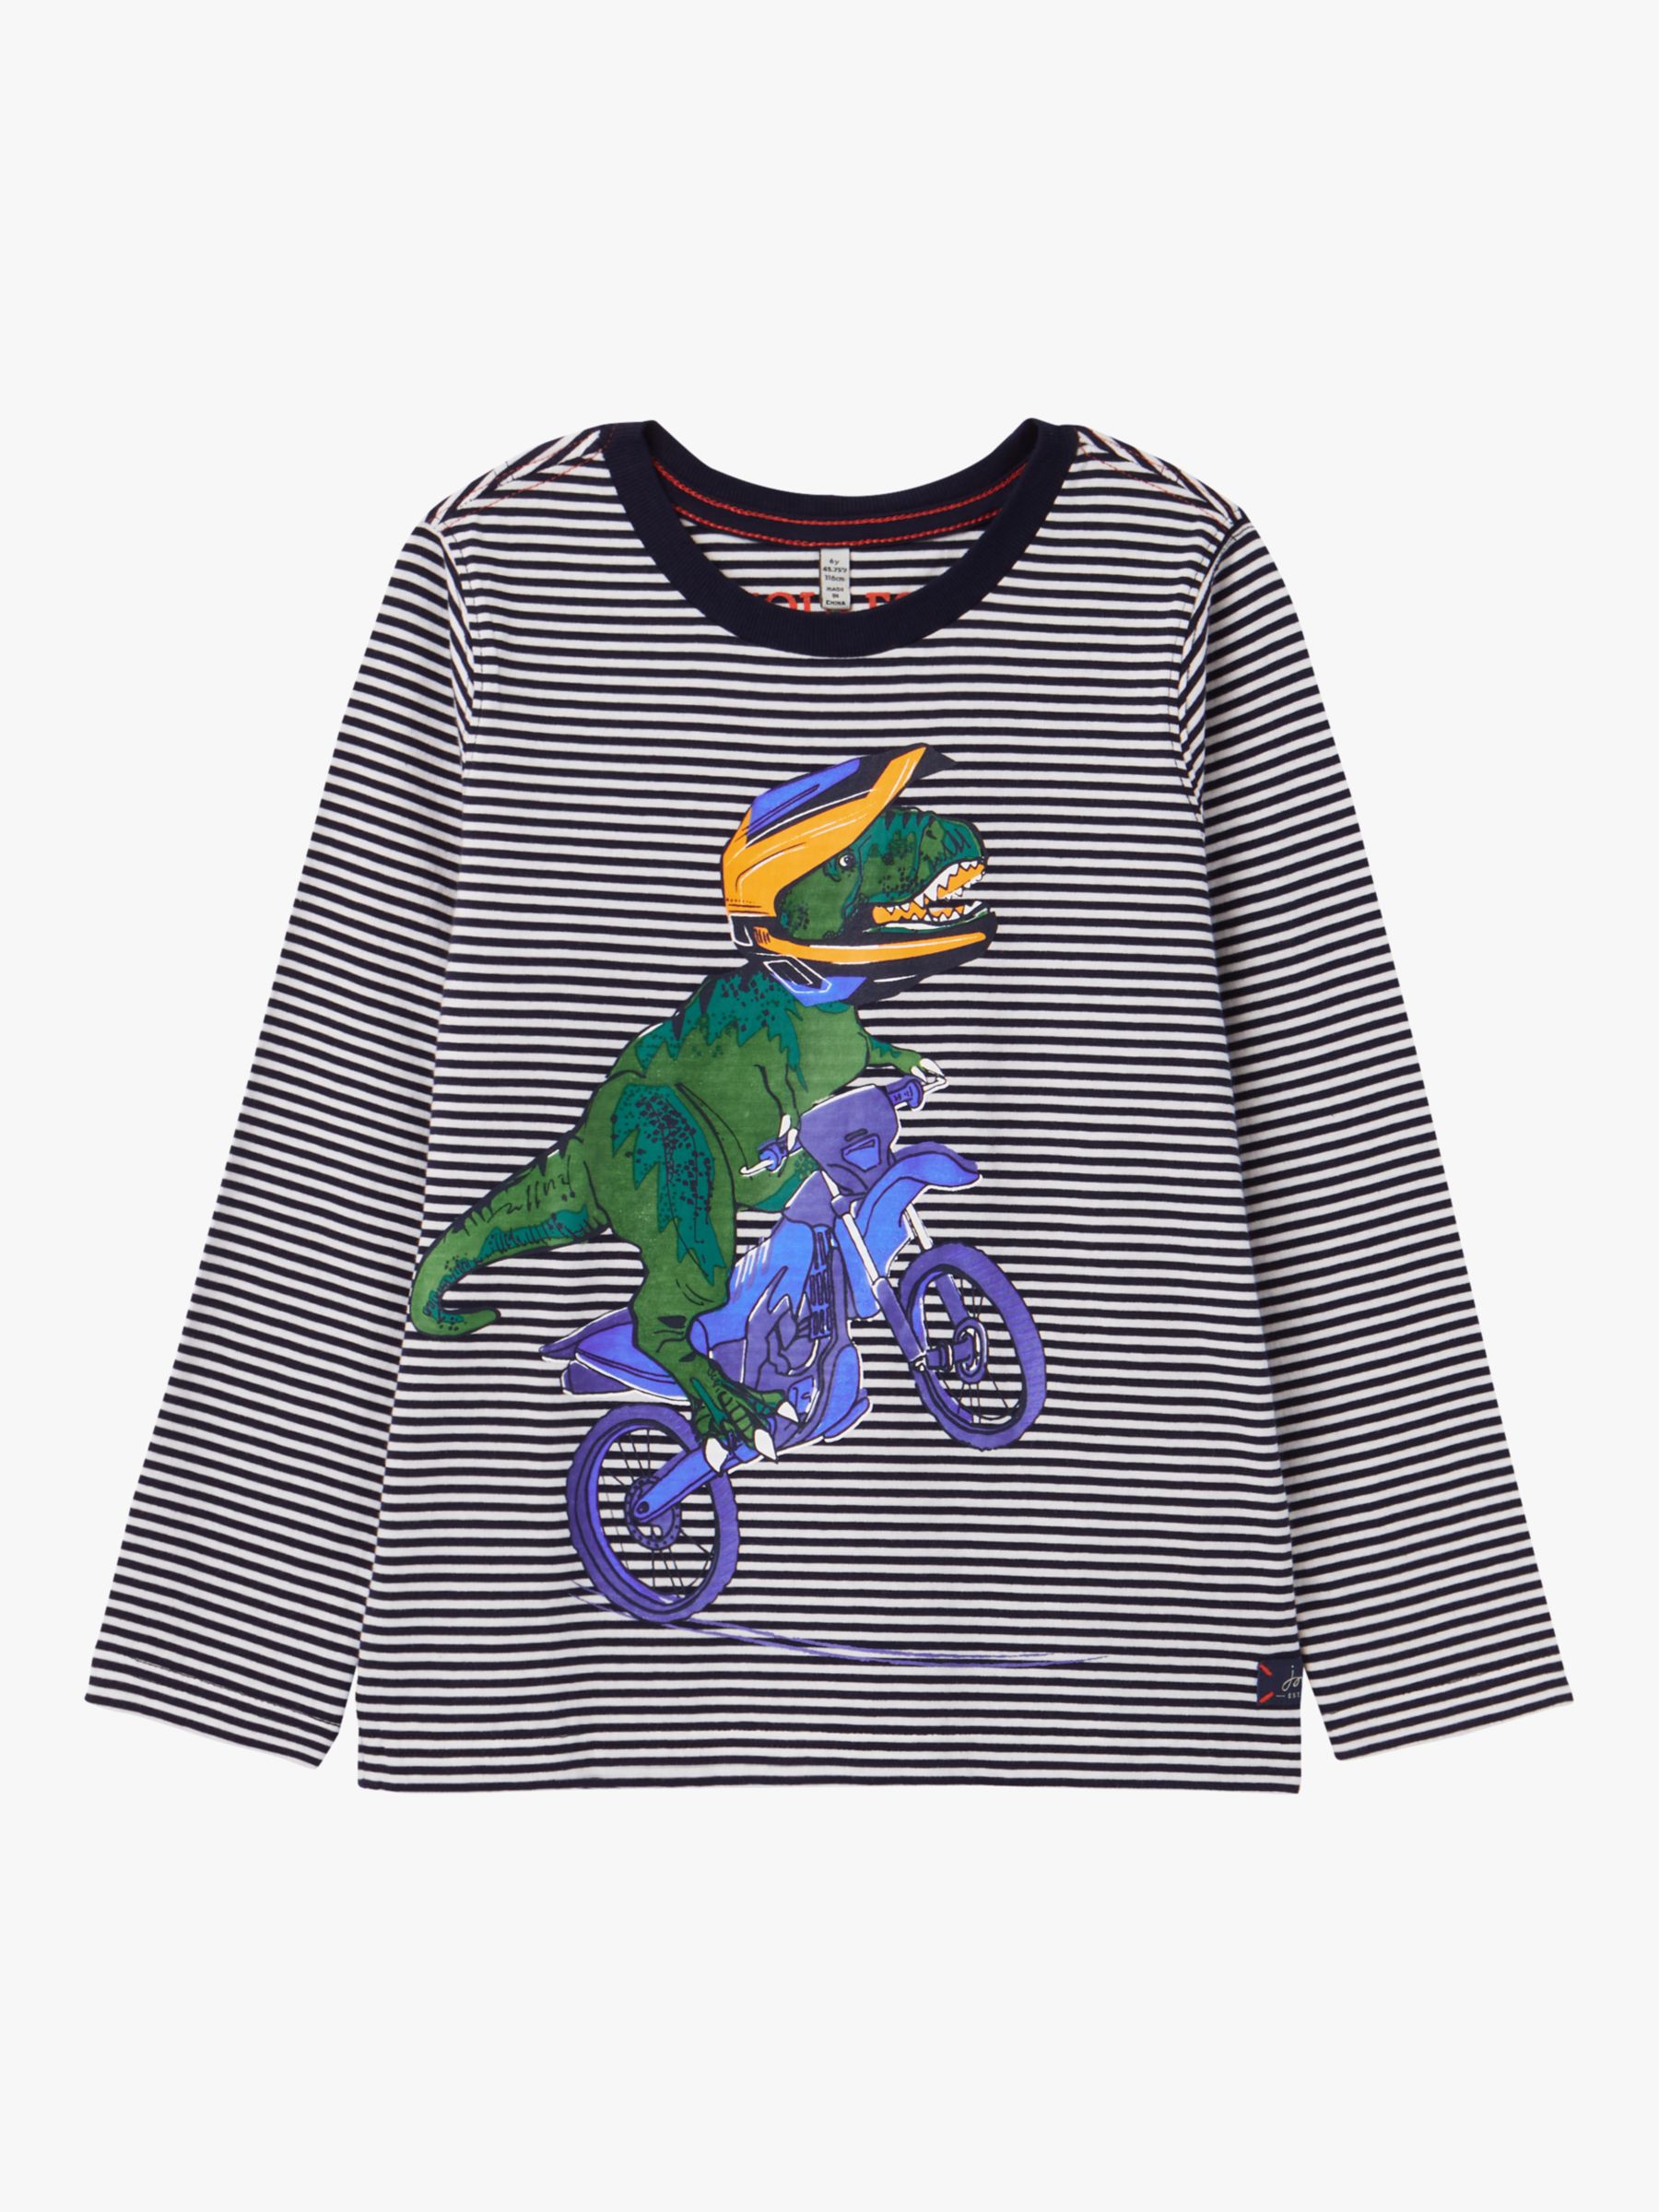 Image of Little Joule Boys Finlay Dinosaur Striped Top Blue